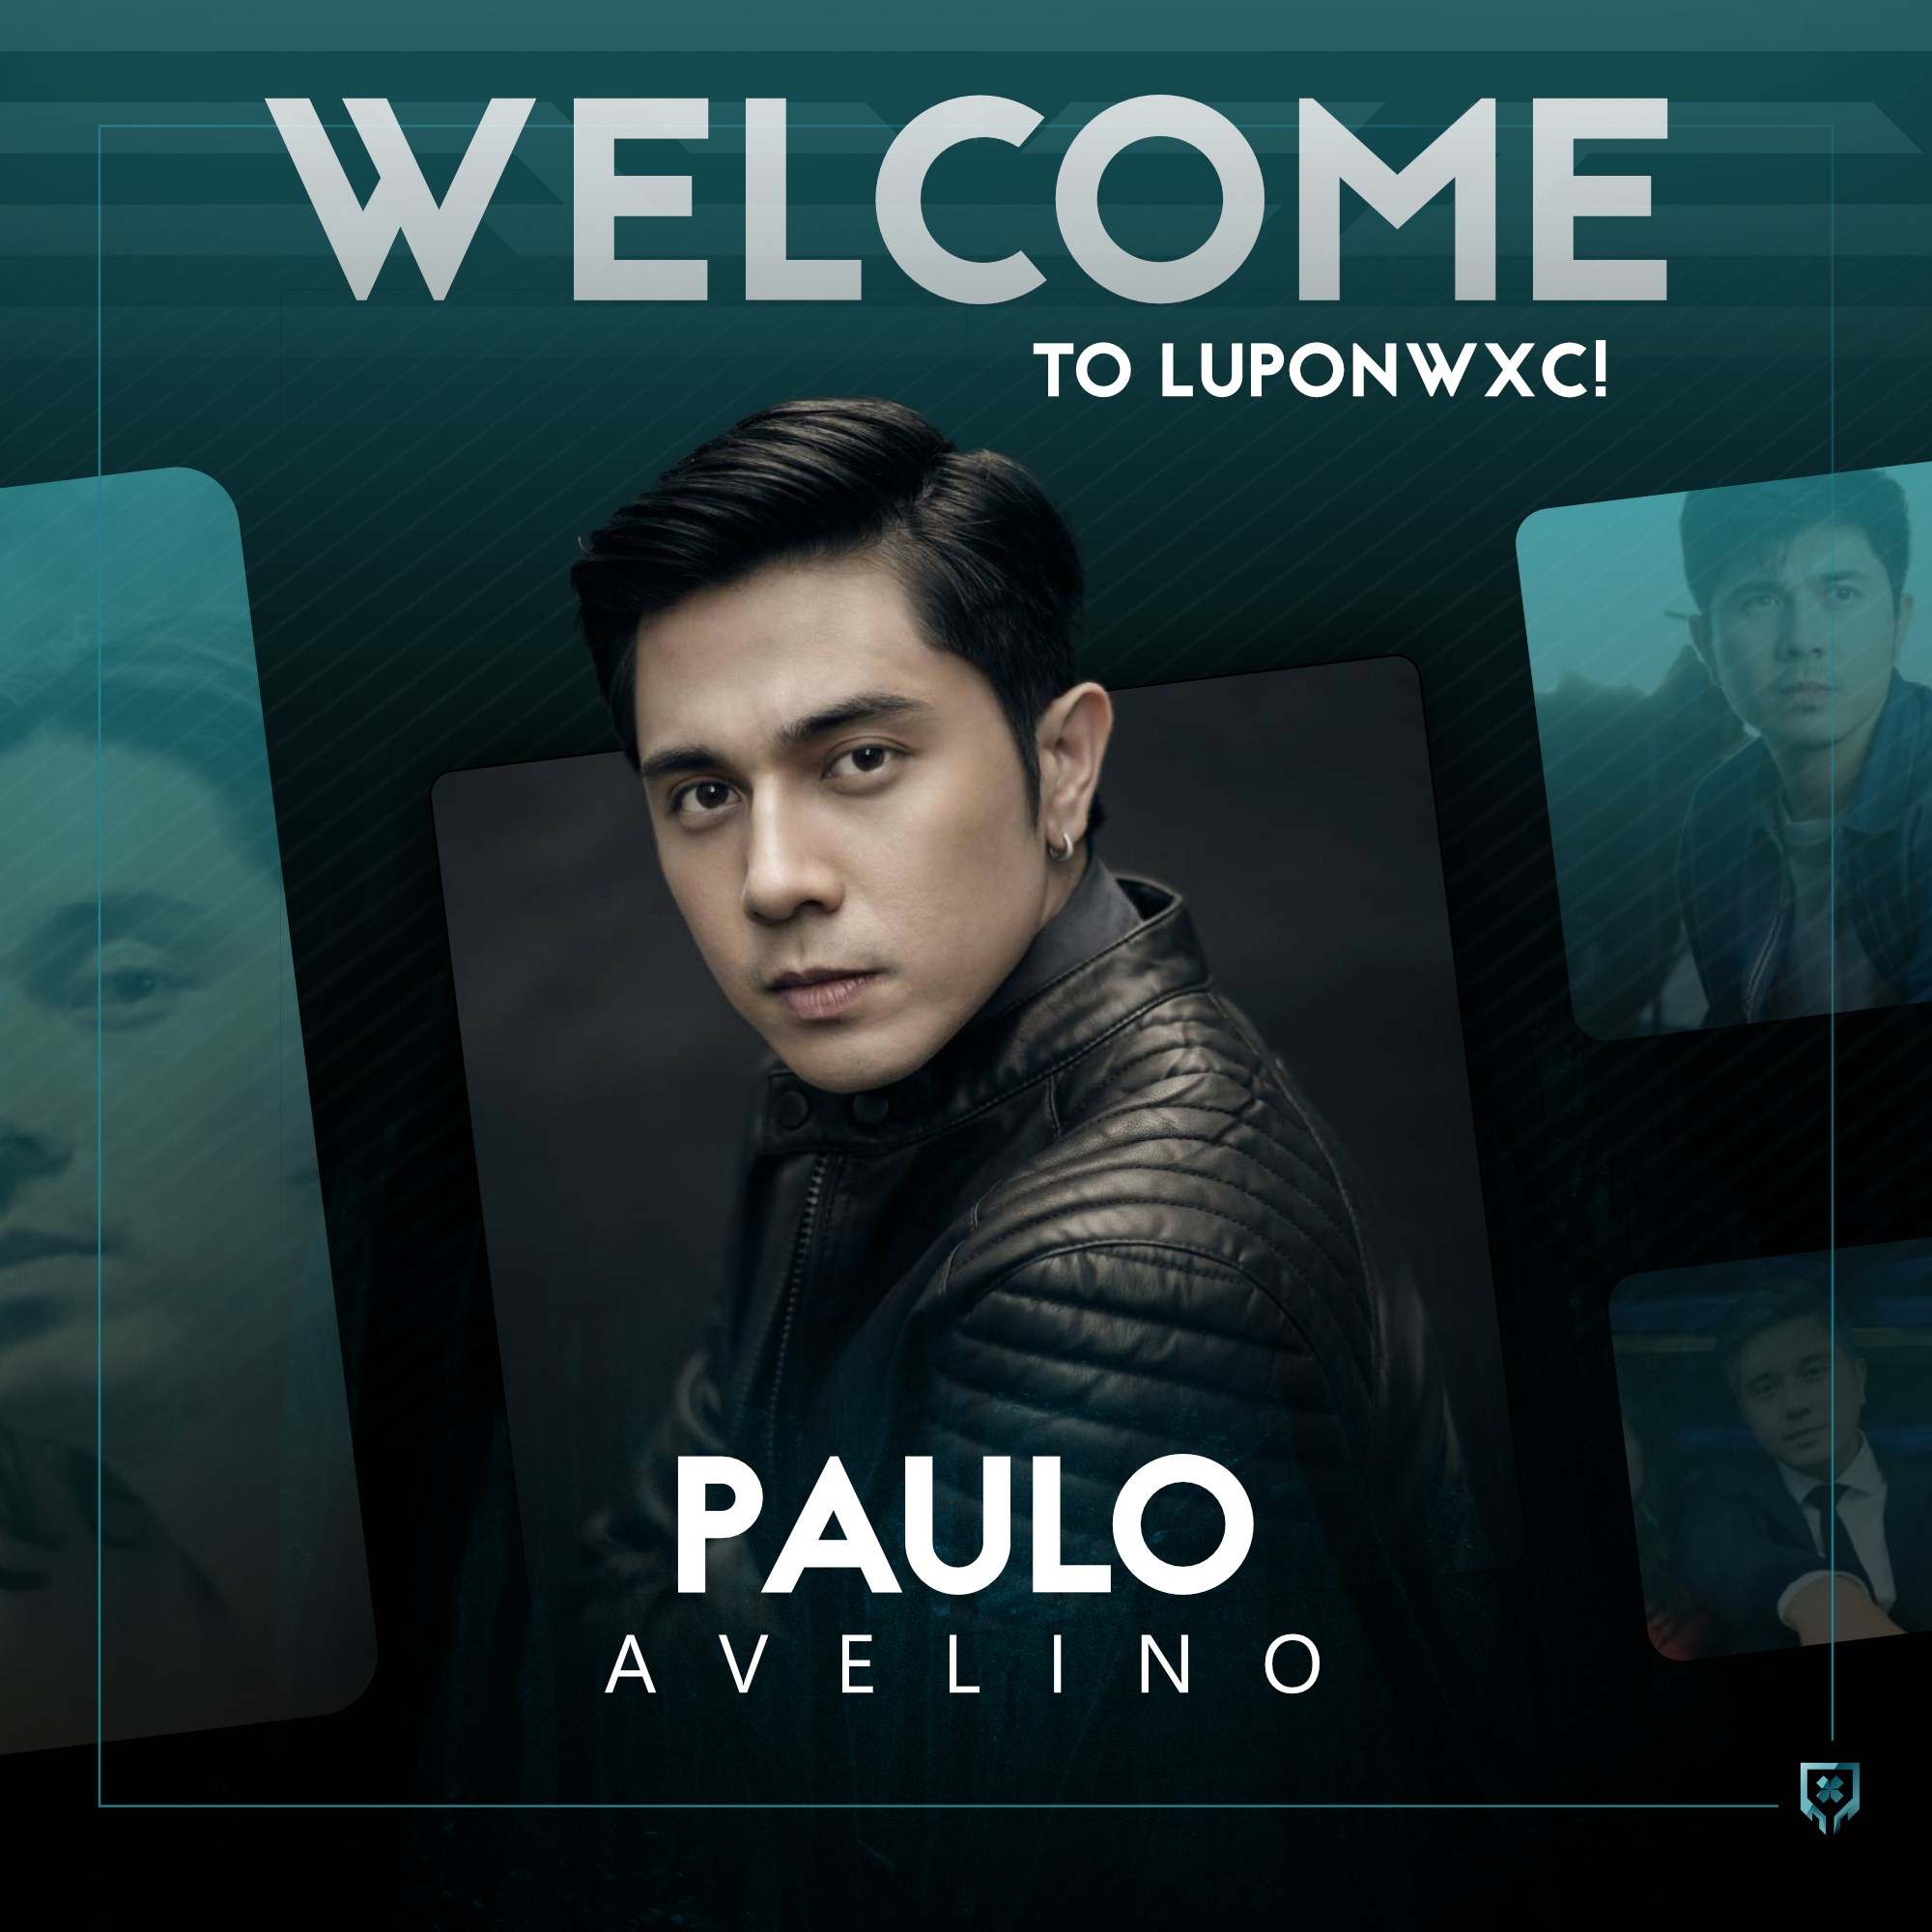 “Want to watch Paulo Avelino play? Actor now part of rising esports firm”